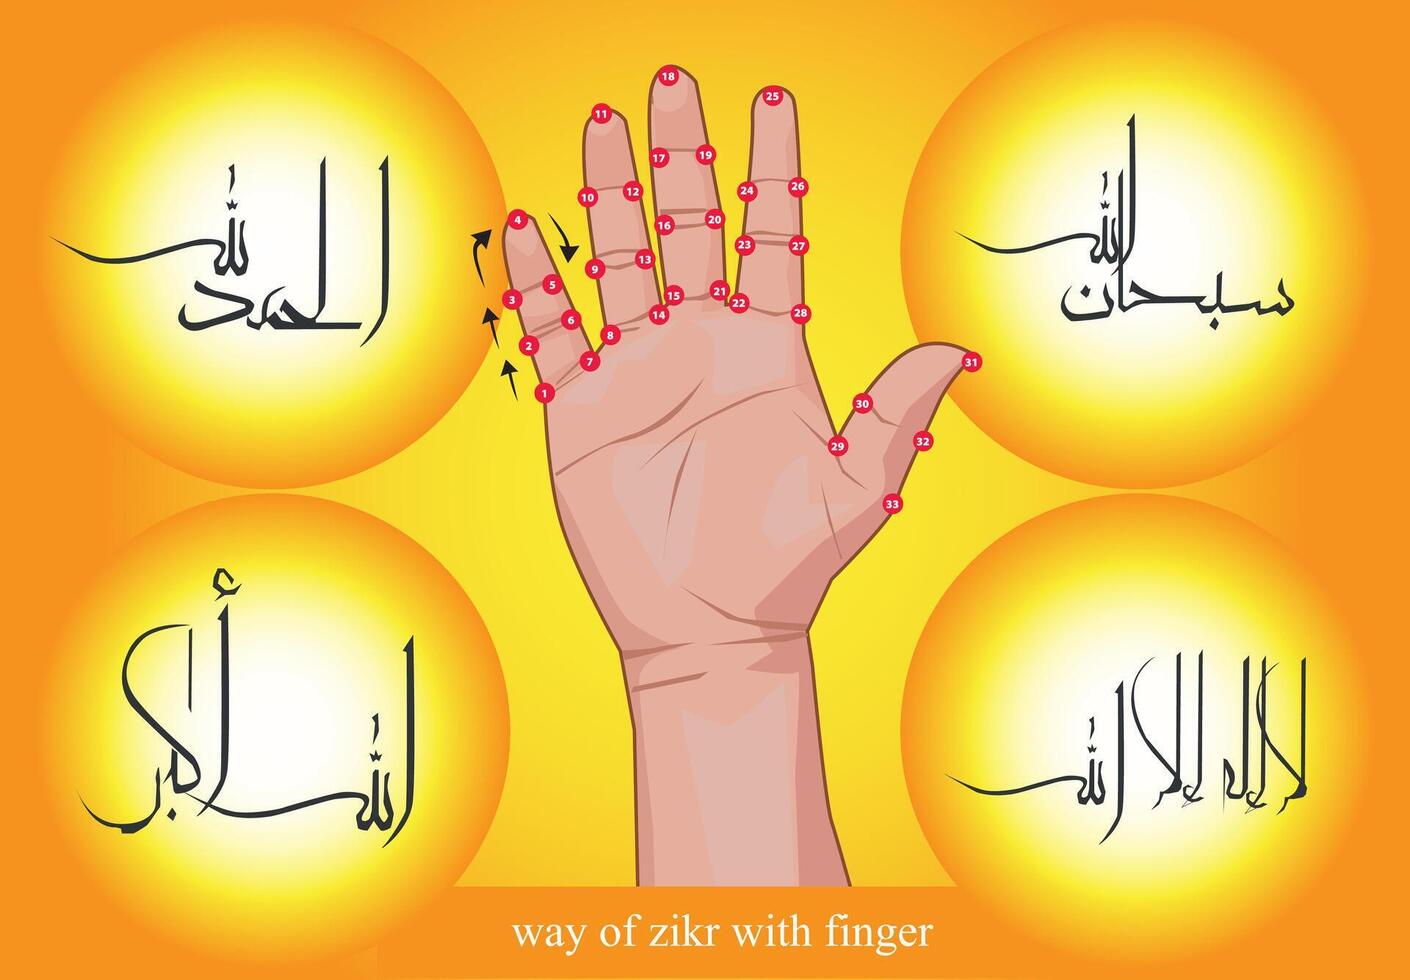 vector way of zikir using the fingers of the hand 33 times with calligraphy arabic font moslem pray